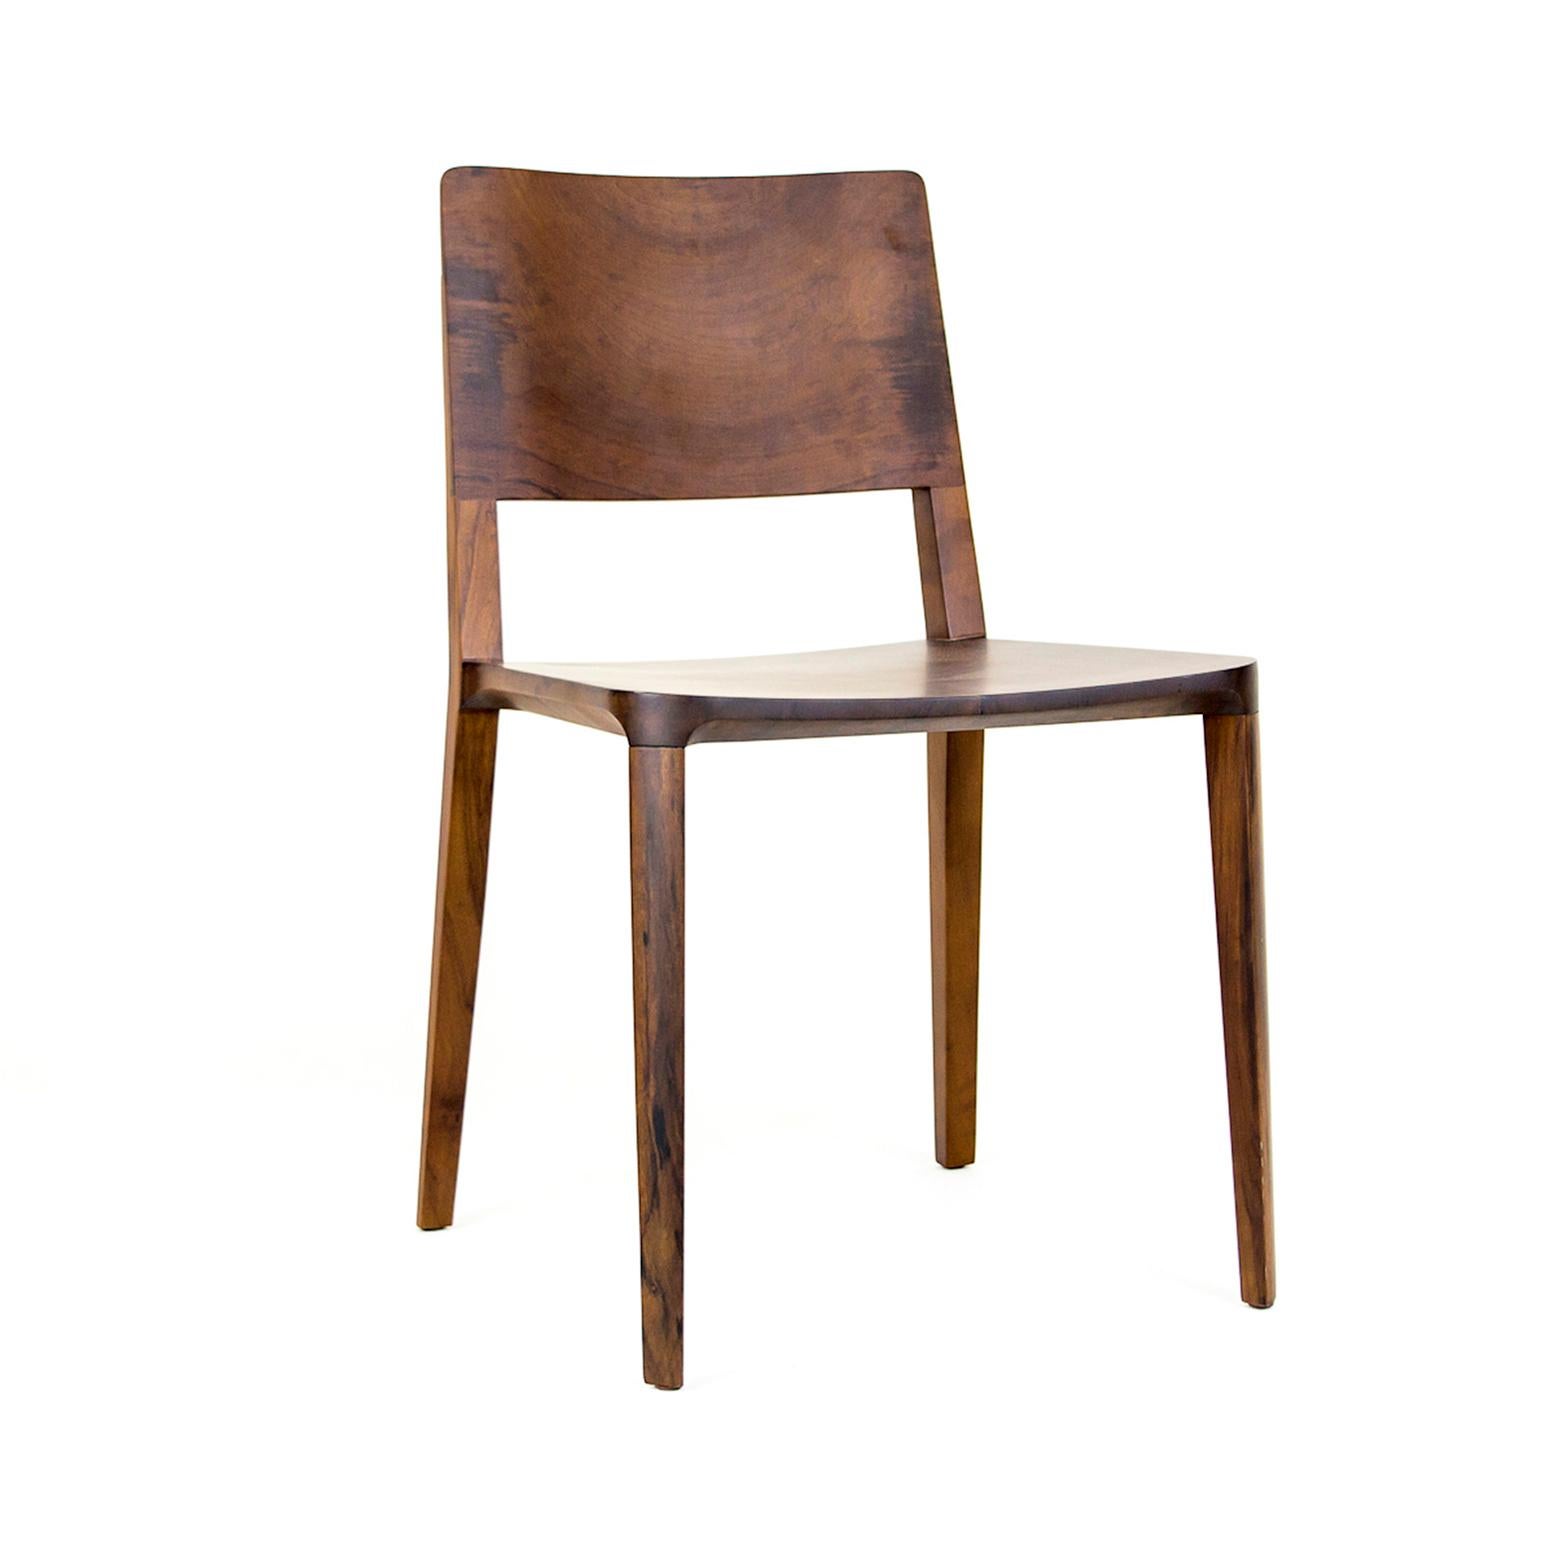 Brazilian Minimalist Chair in Black Imbuia Hardwood Limited Edition with Arms